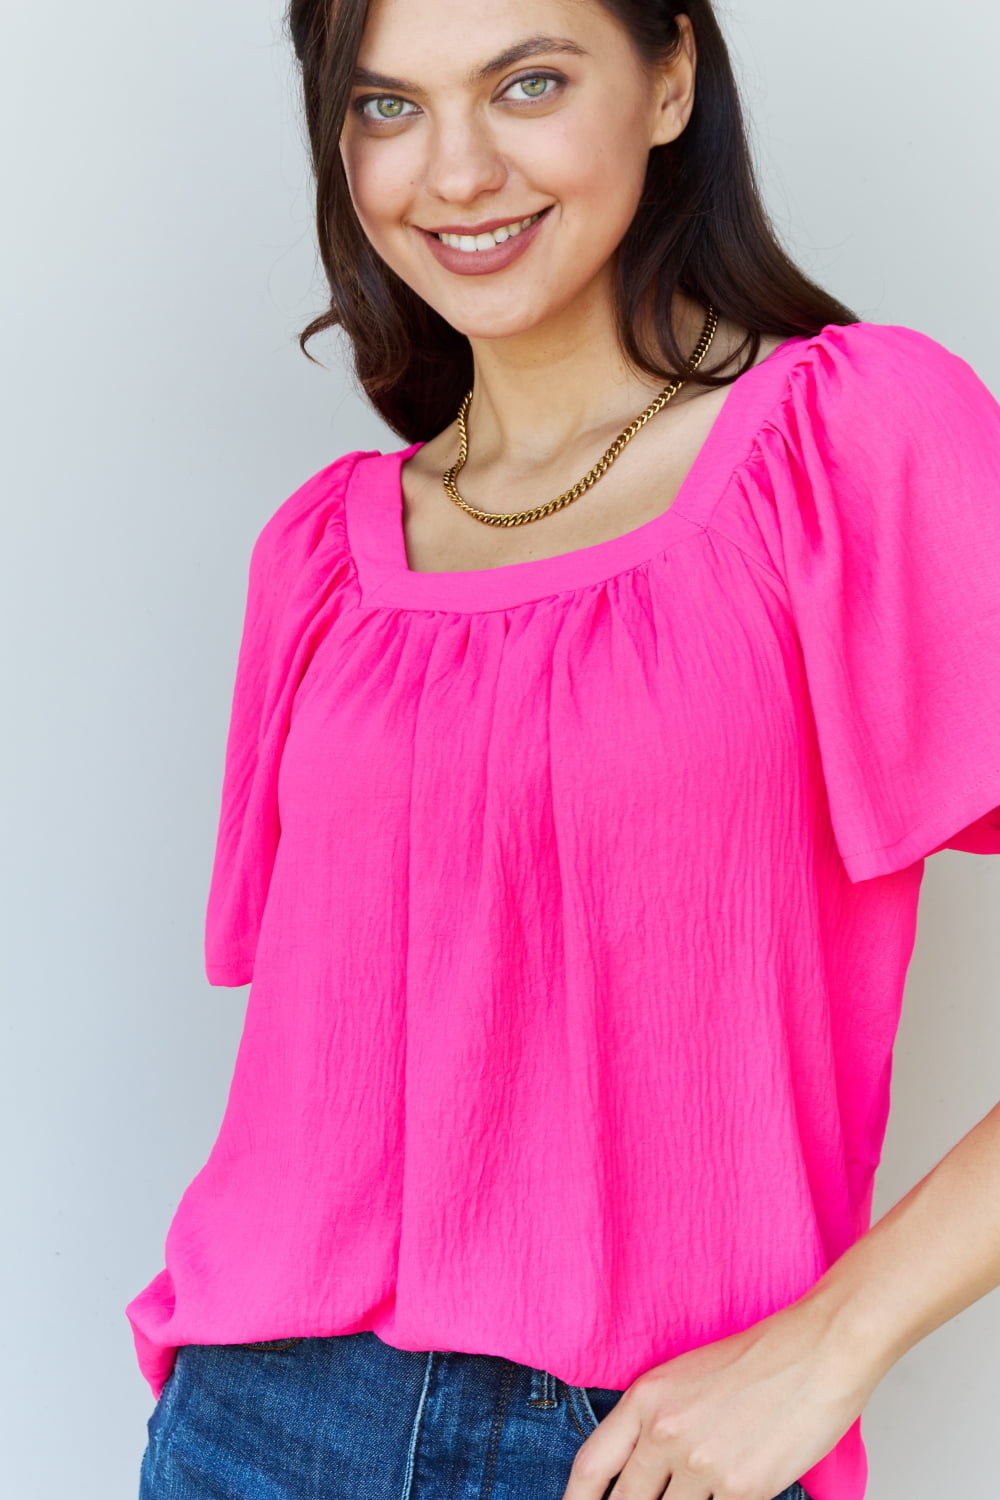 Keep Me Close Square Neck Short Sleeve Blouse in Fuchsia - Women’s Clothing & Accessories - Dresses - 4 - 2024